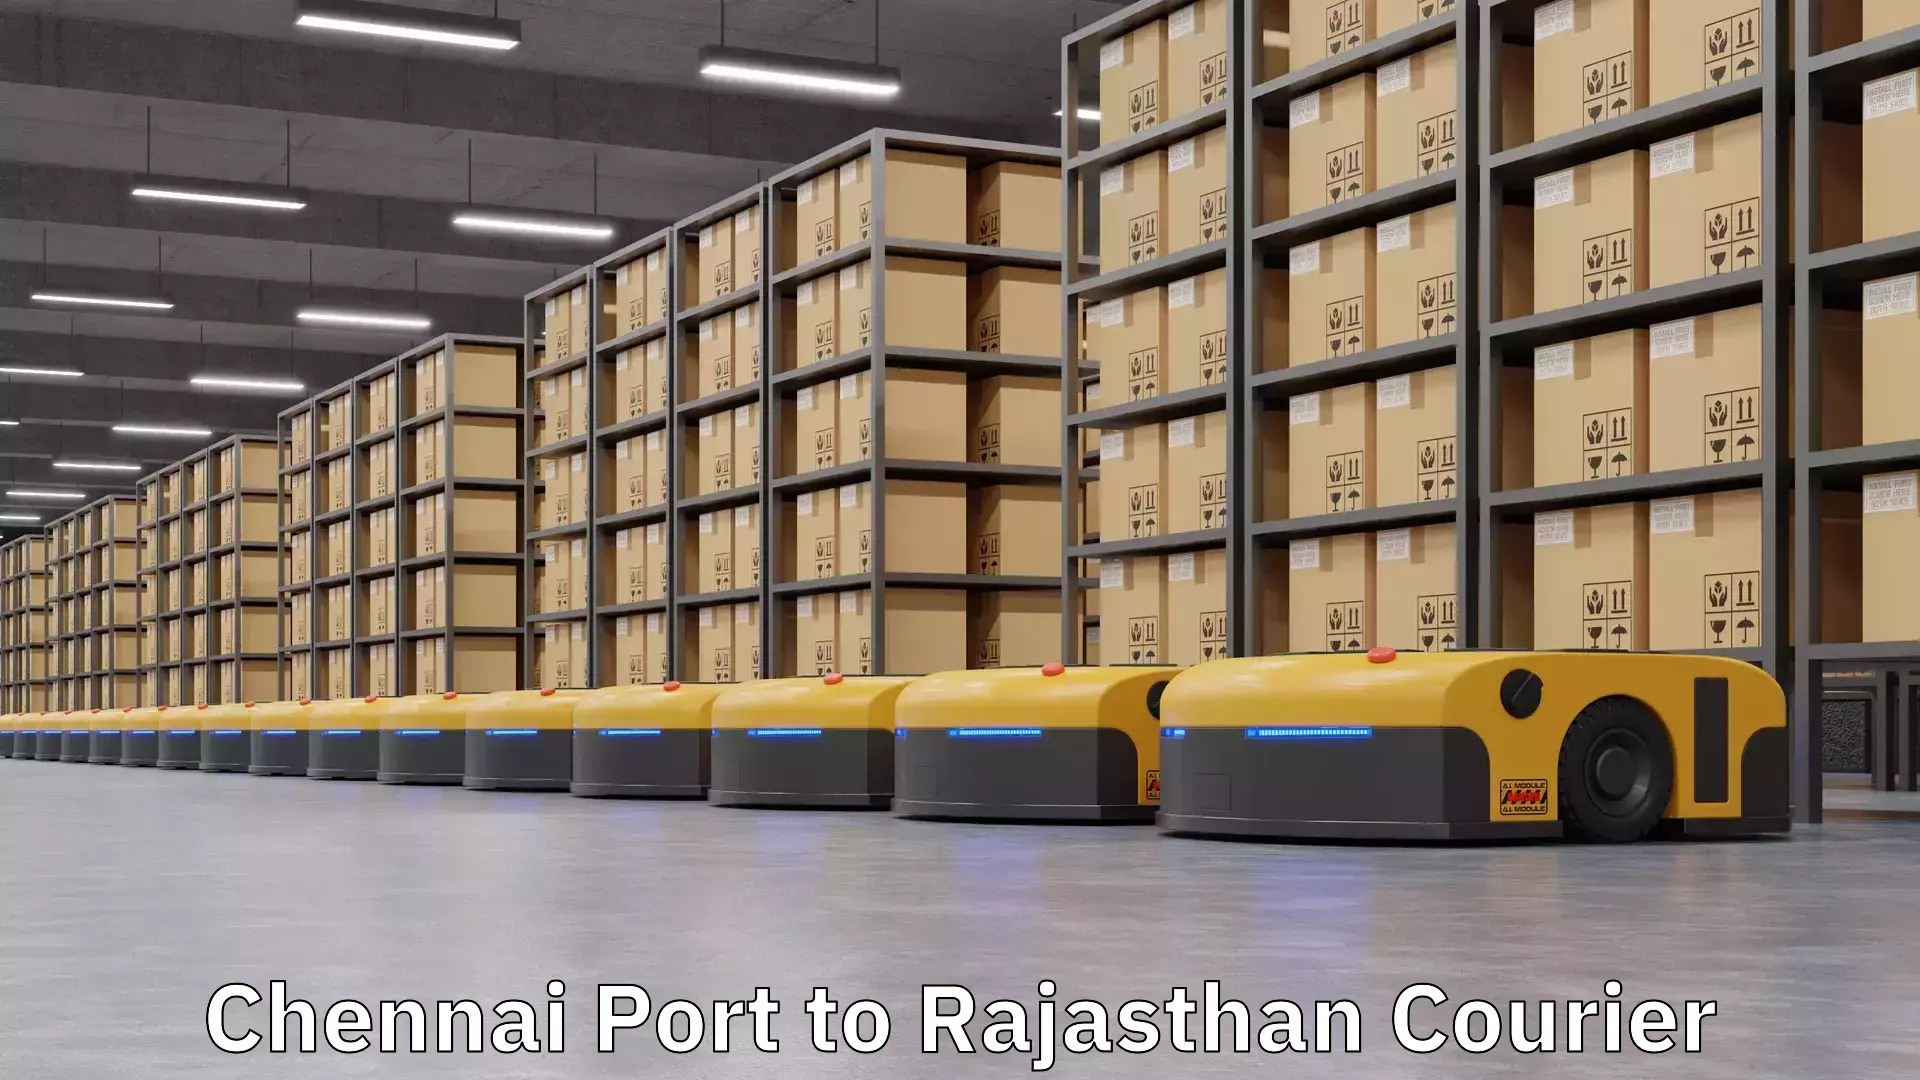 Courier service partnerships Chennai Port to Rajasthan